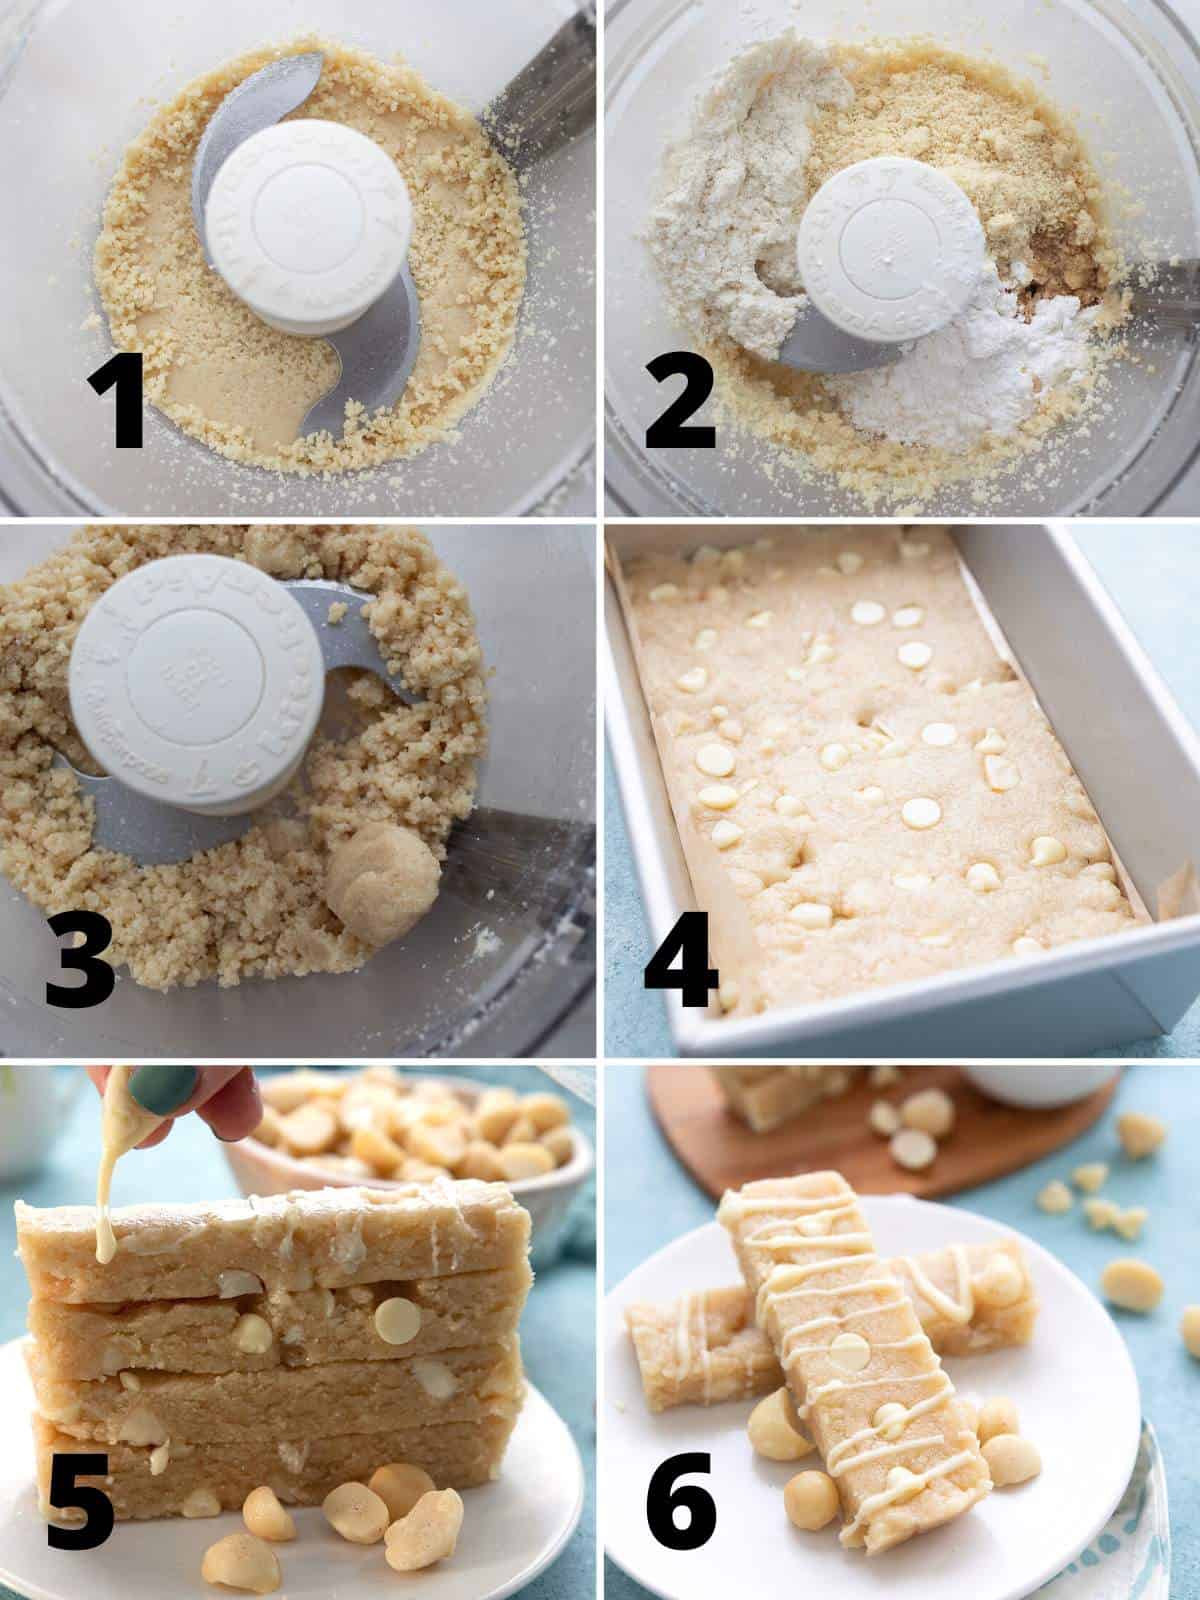 A collage of 6 images showing the steps for making keto protein bars.